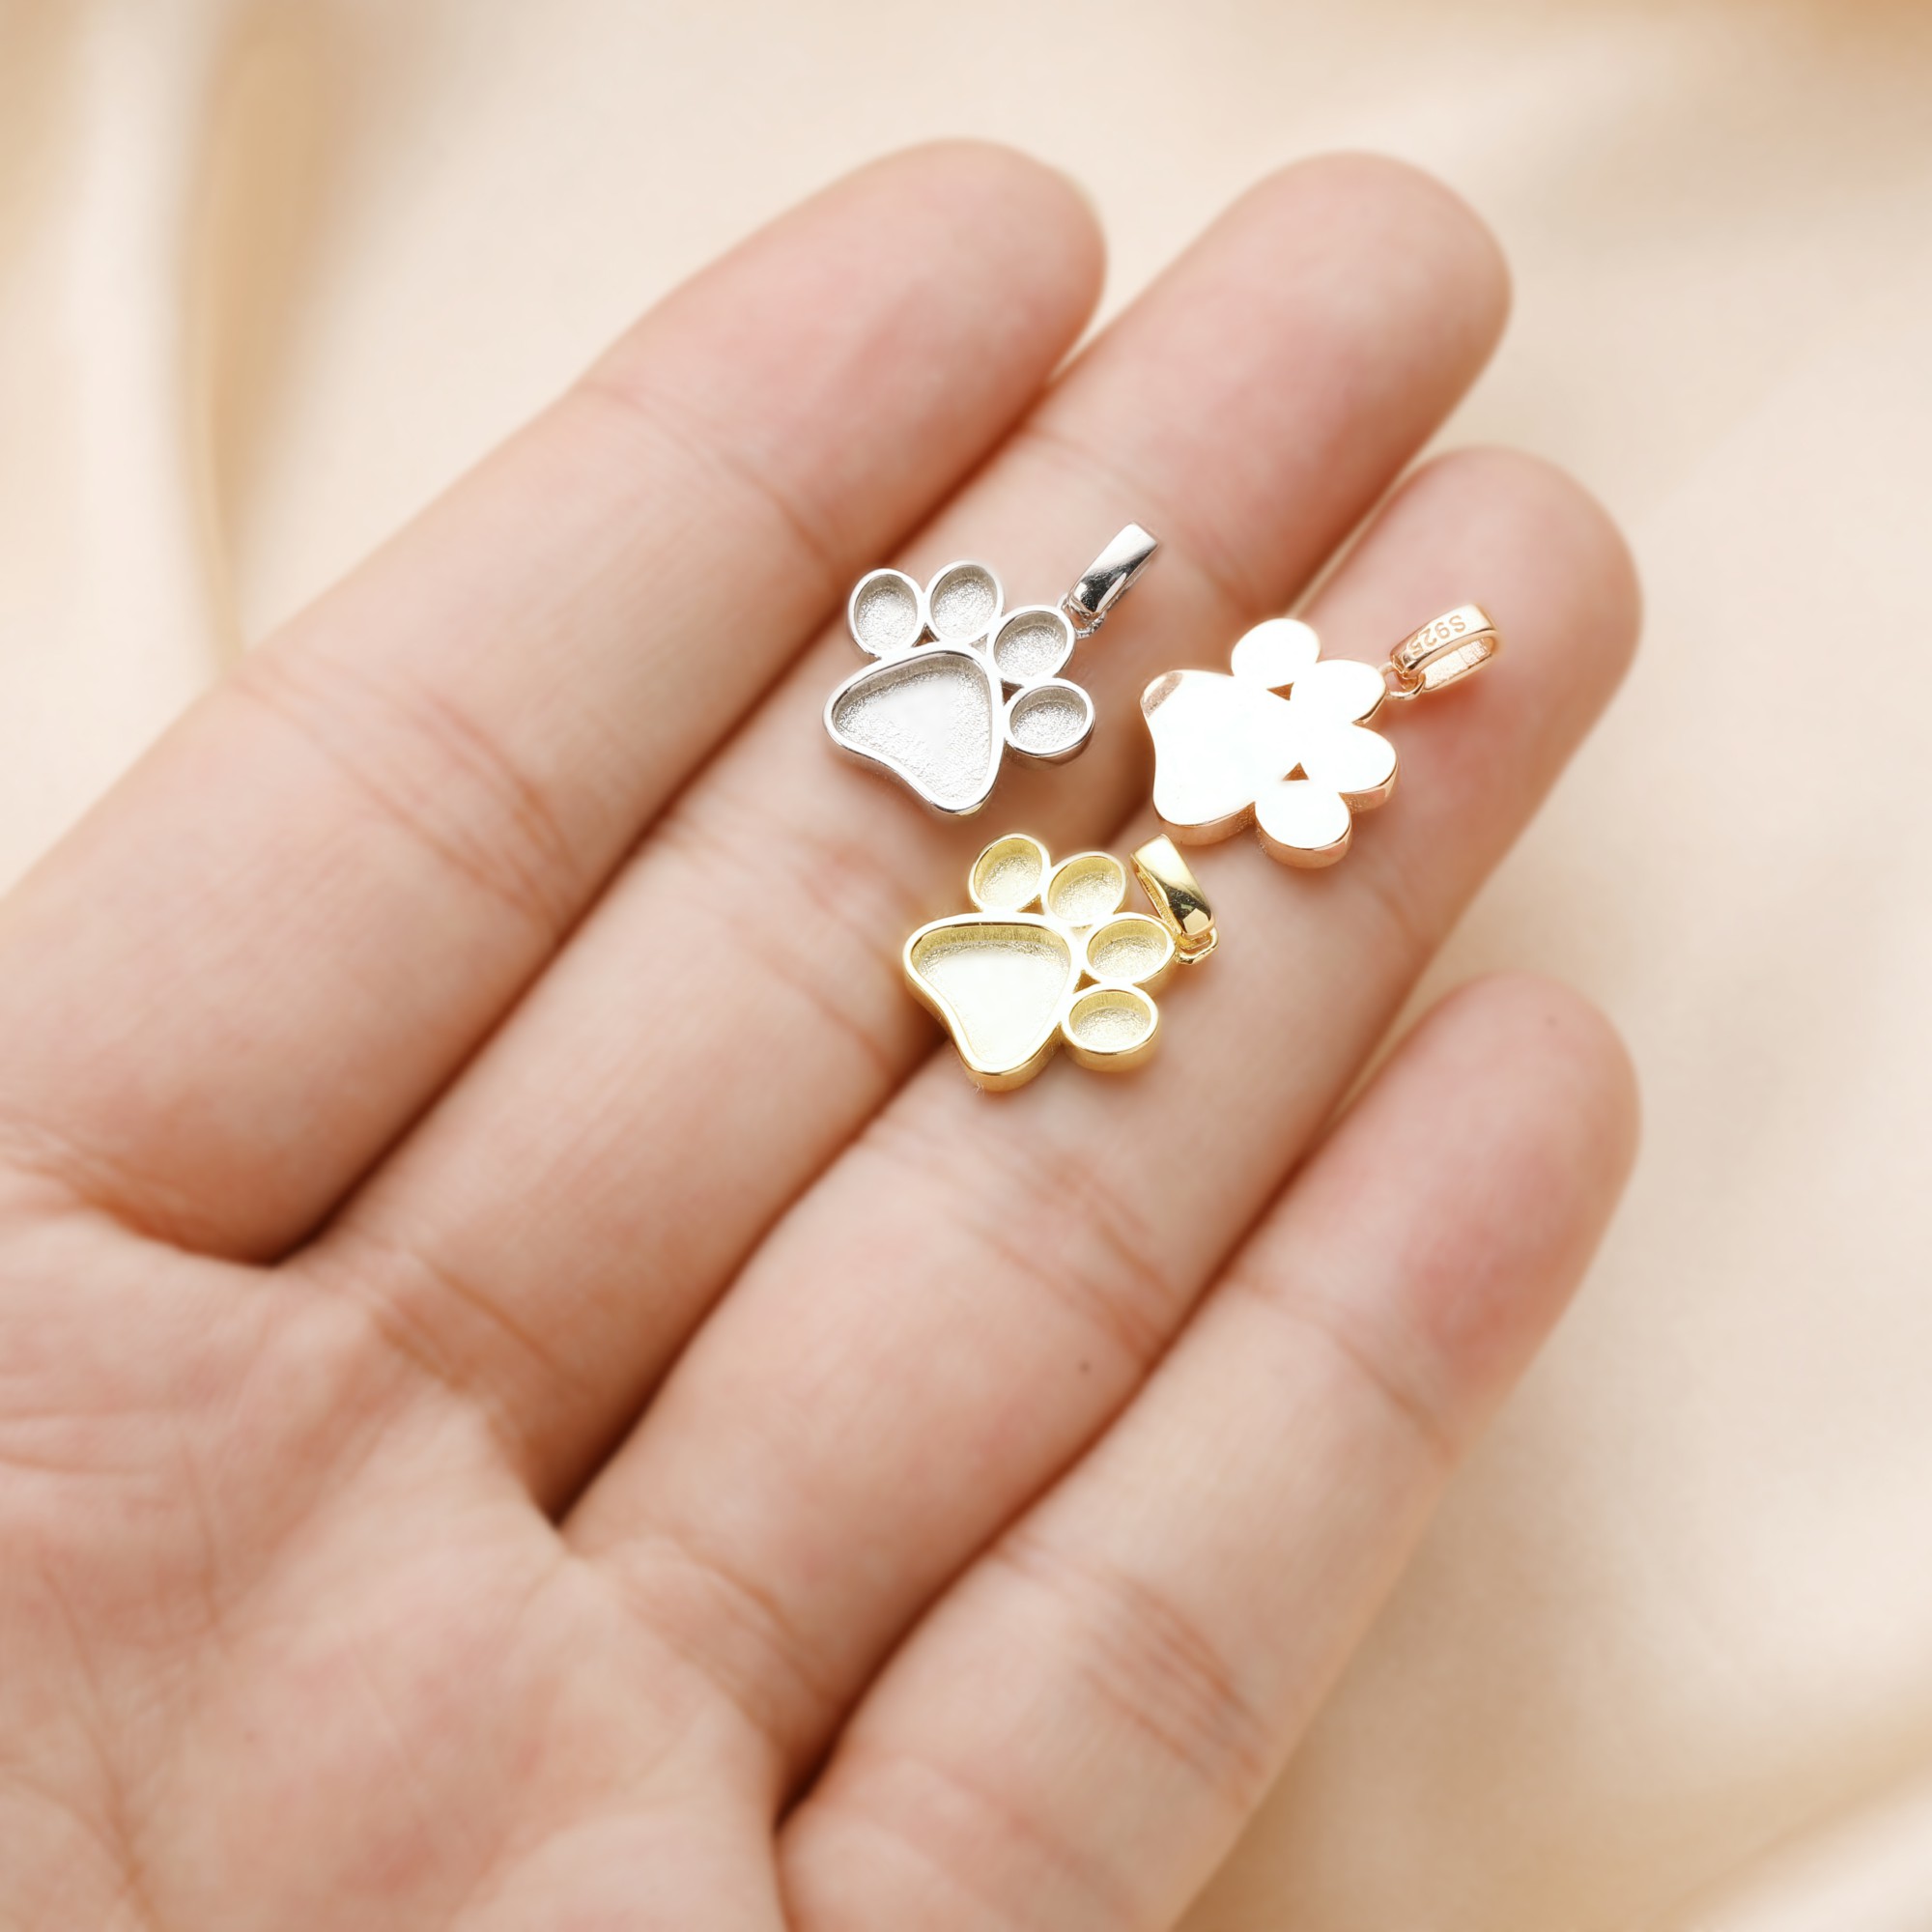 13MM Keepsake Breast Milk Resin Dog Paw Pendant Bezel Settings,Solid 925 Sterling Silver Rose Gold Plated Charm,DIY Pendant Bezel For Gemstone 1431165 - Click Image to Close